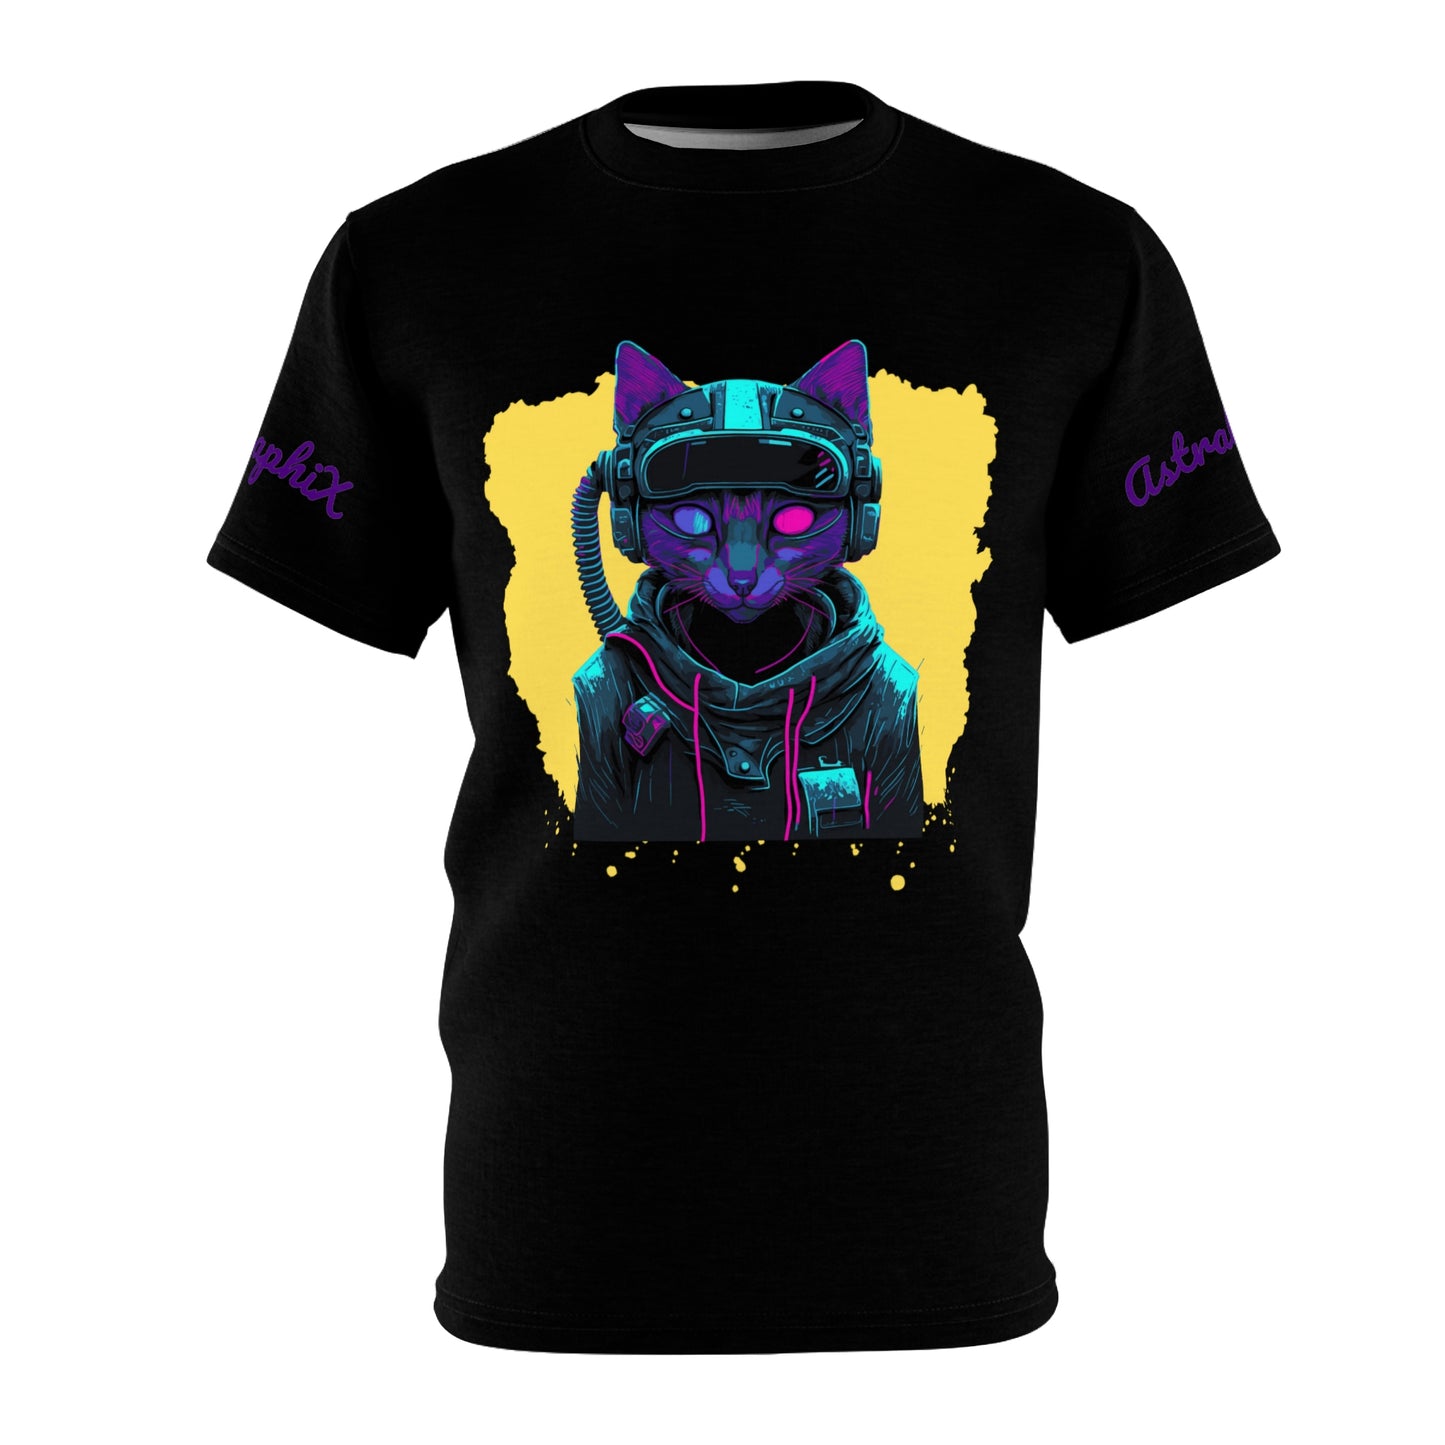 Cyber Punk Collection - Unisex AOP Cut & Sew Tee - Cyber Kitty in Black